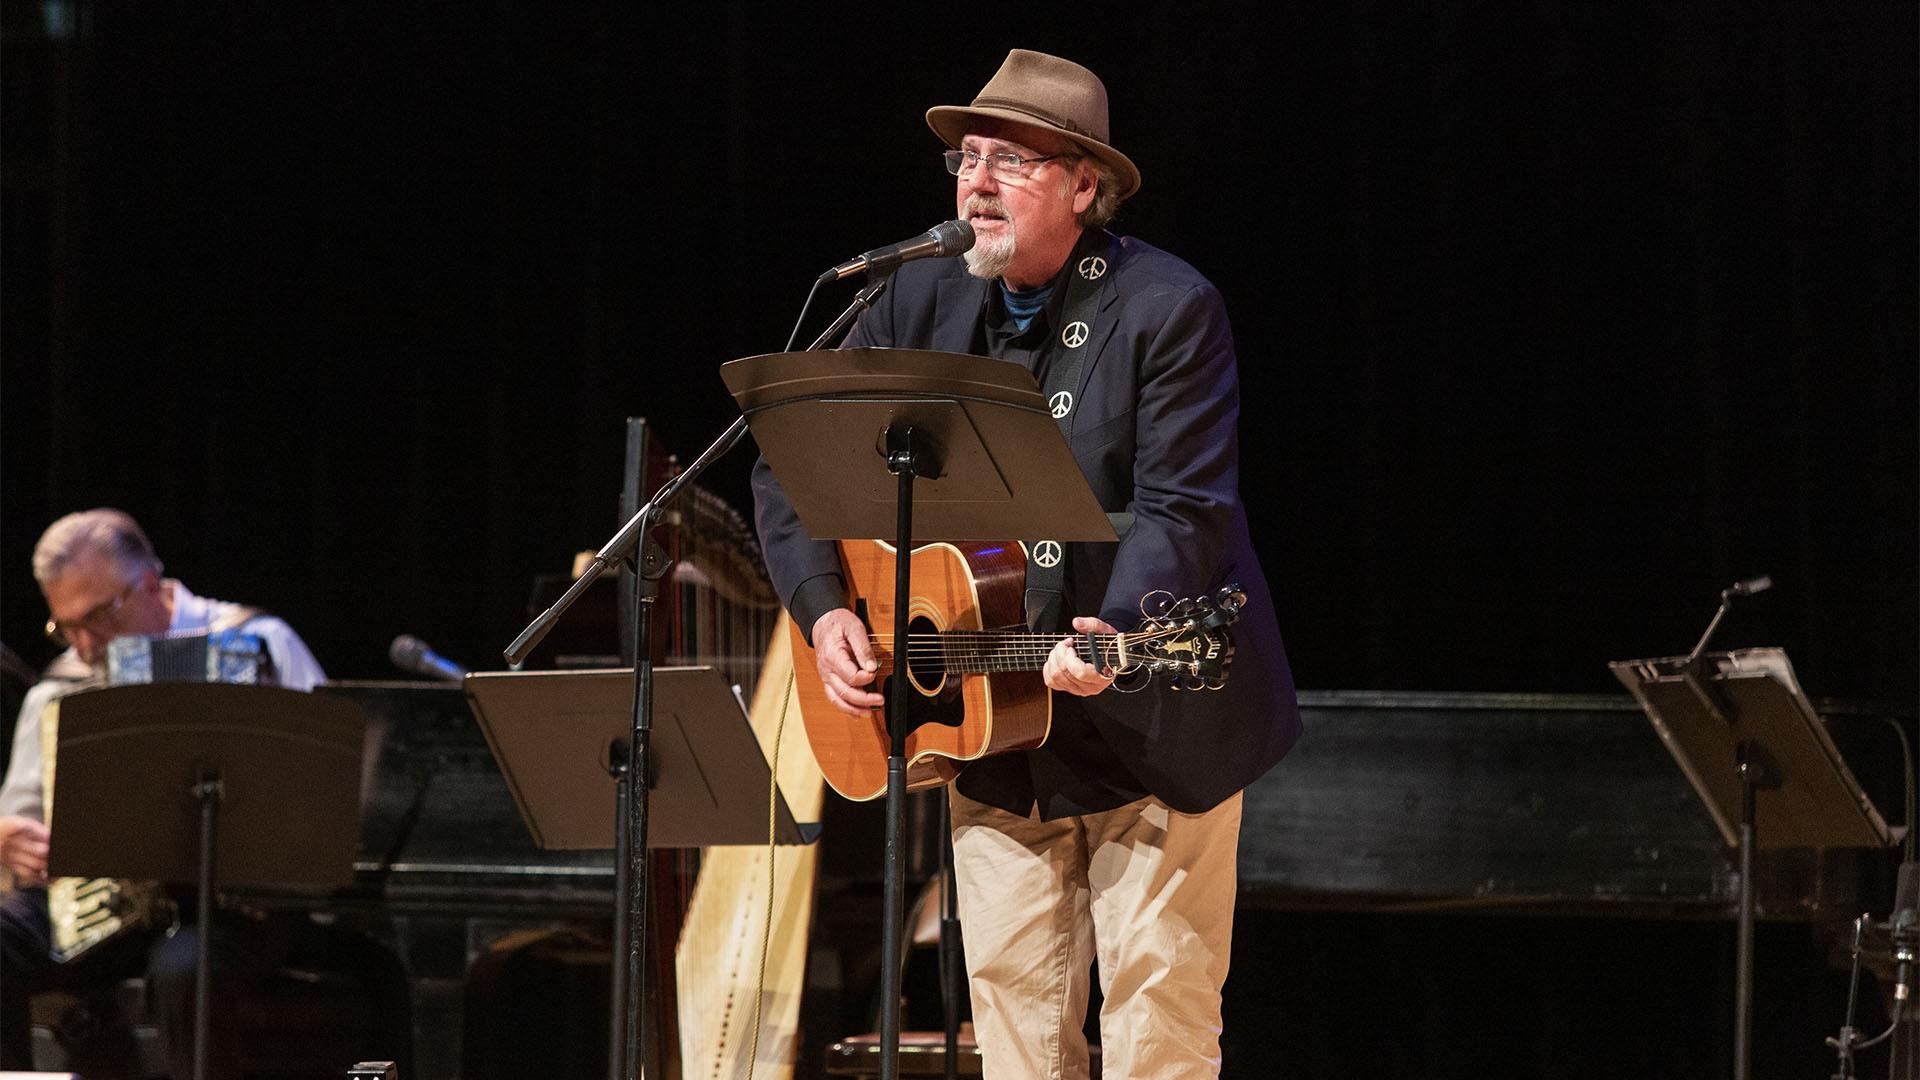 Image of Songwriter Michael Veitch performing